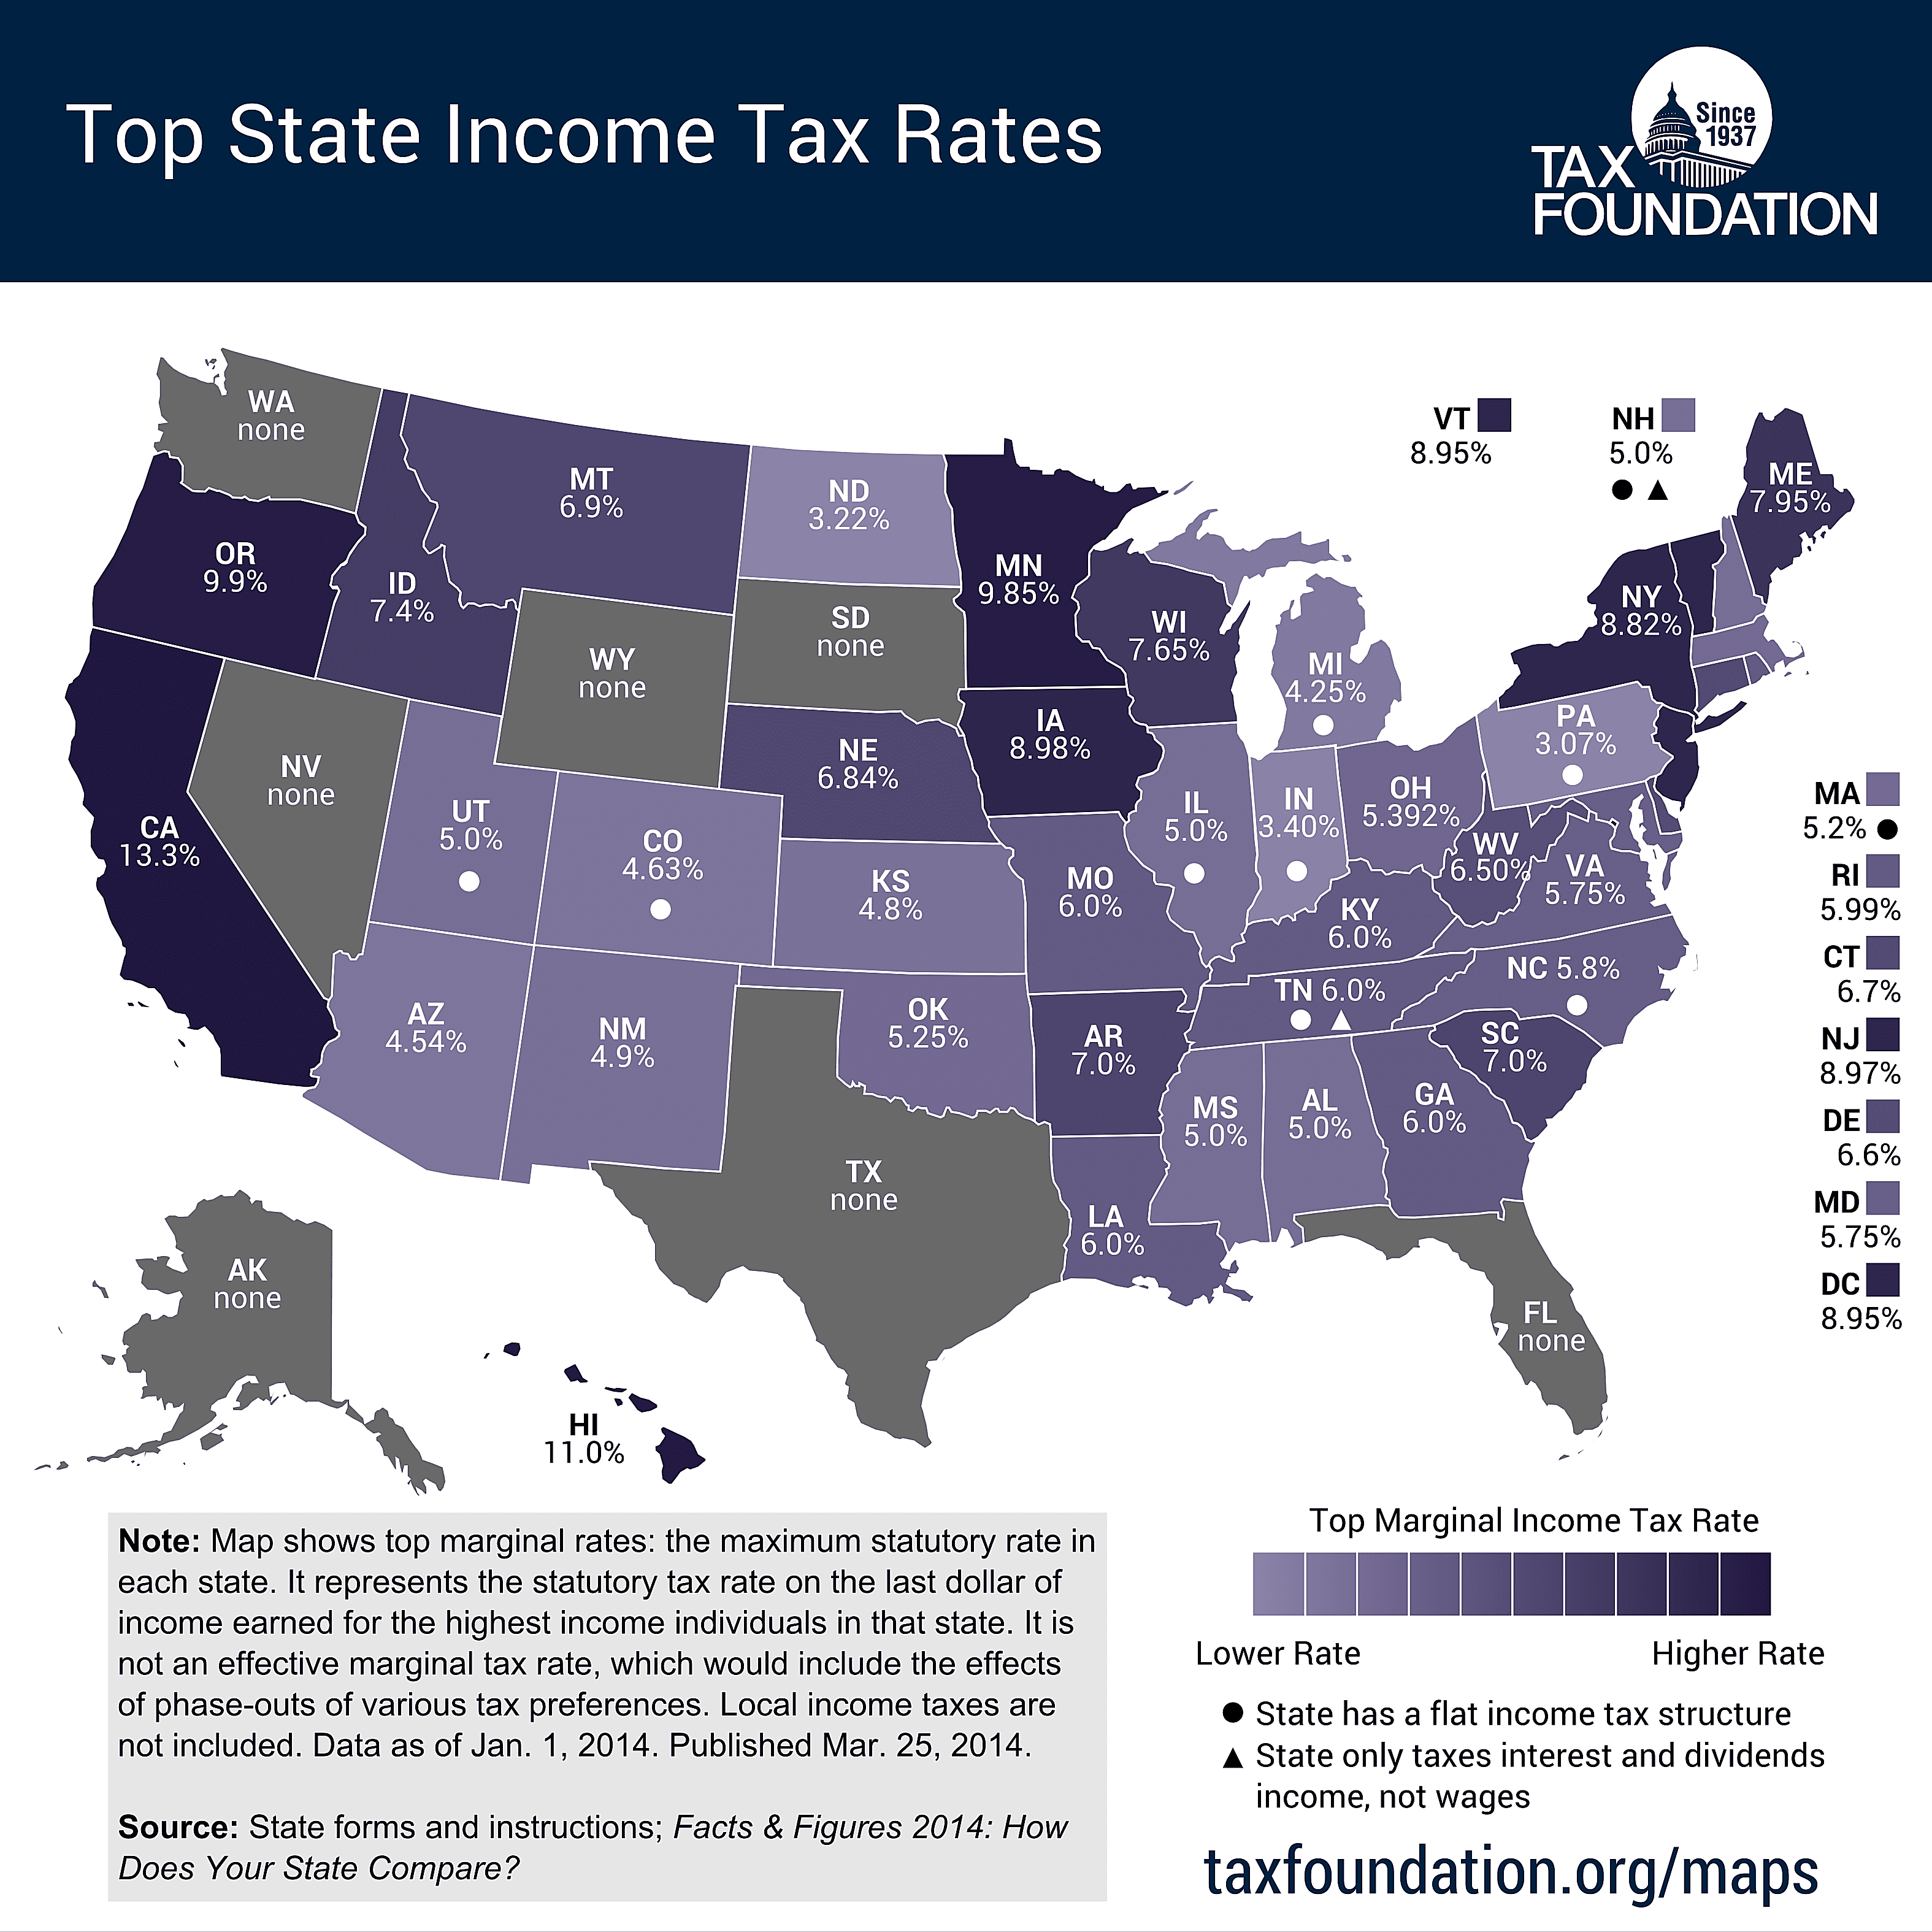 a-list-of-income-tax-rates-for-each-state